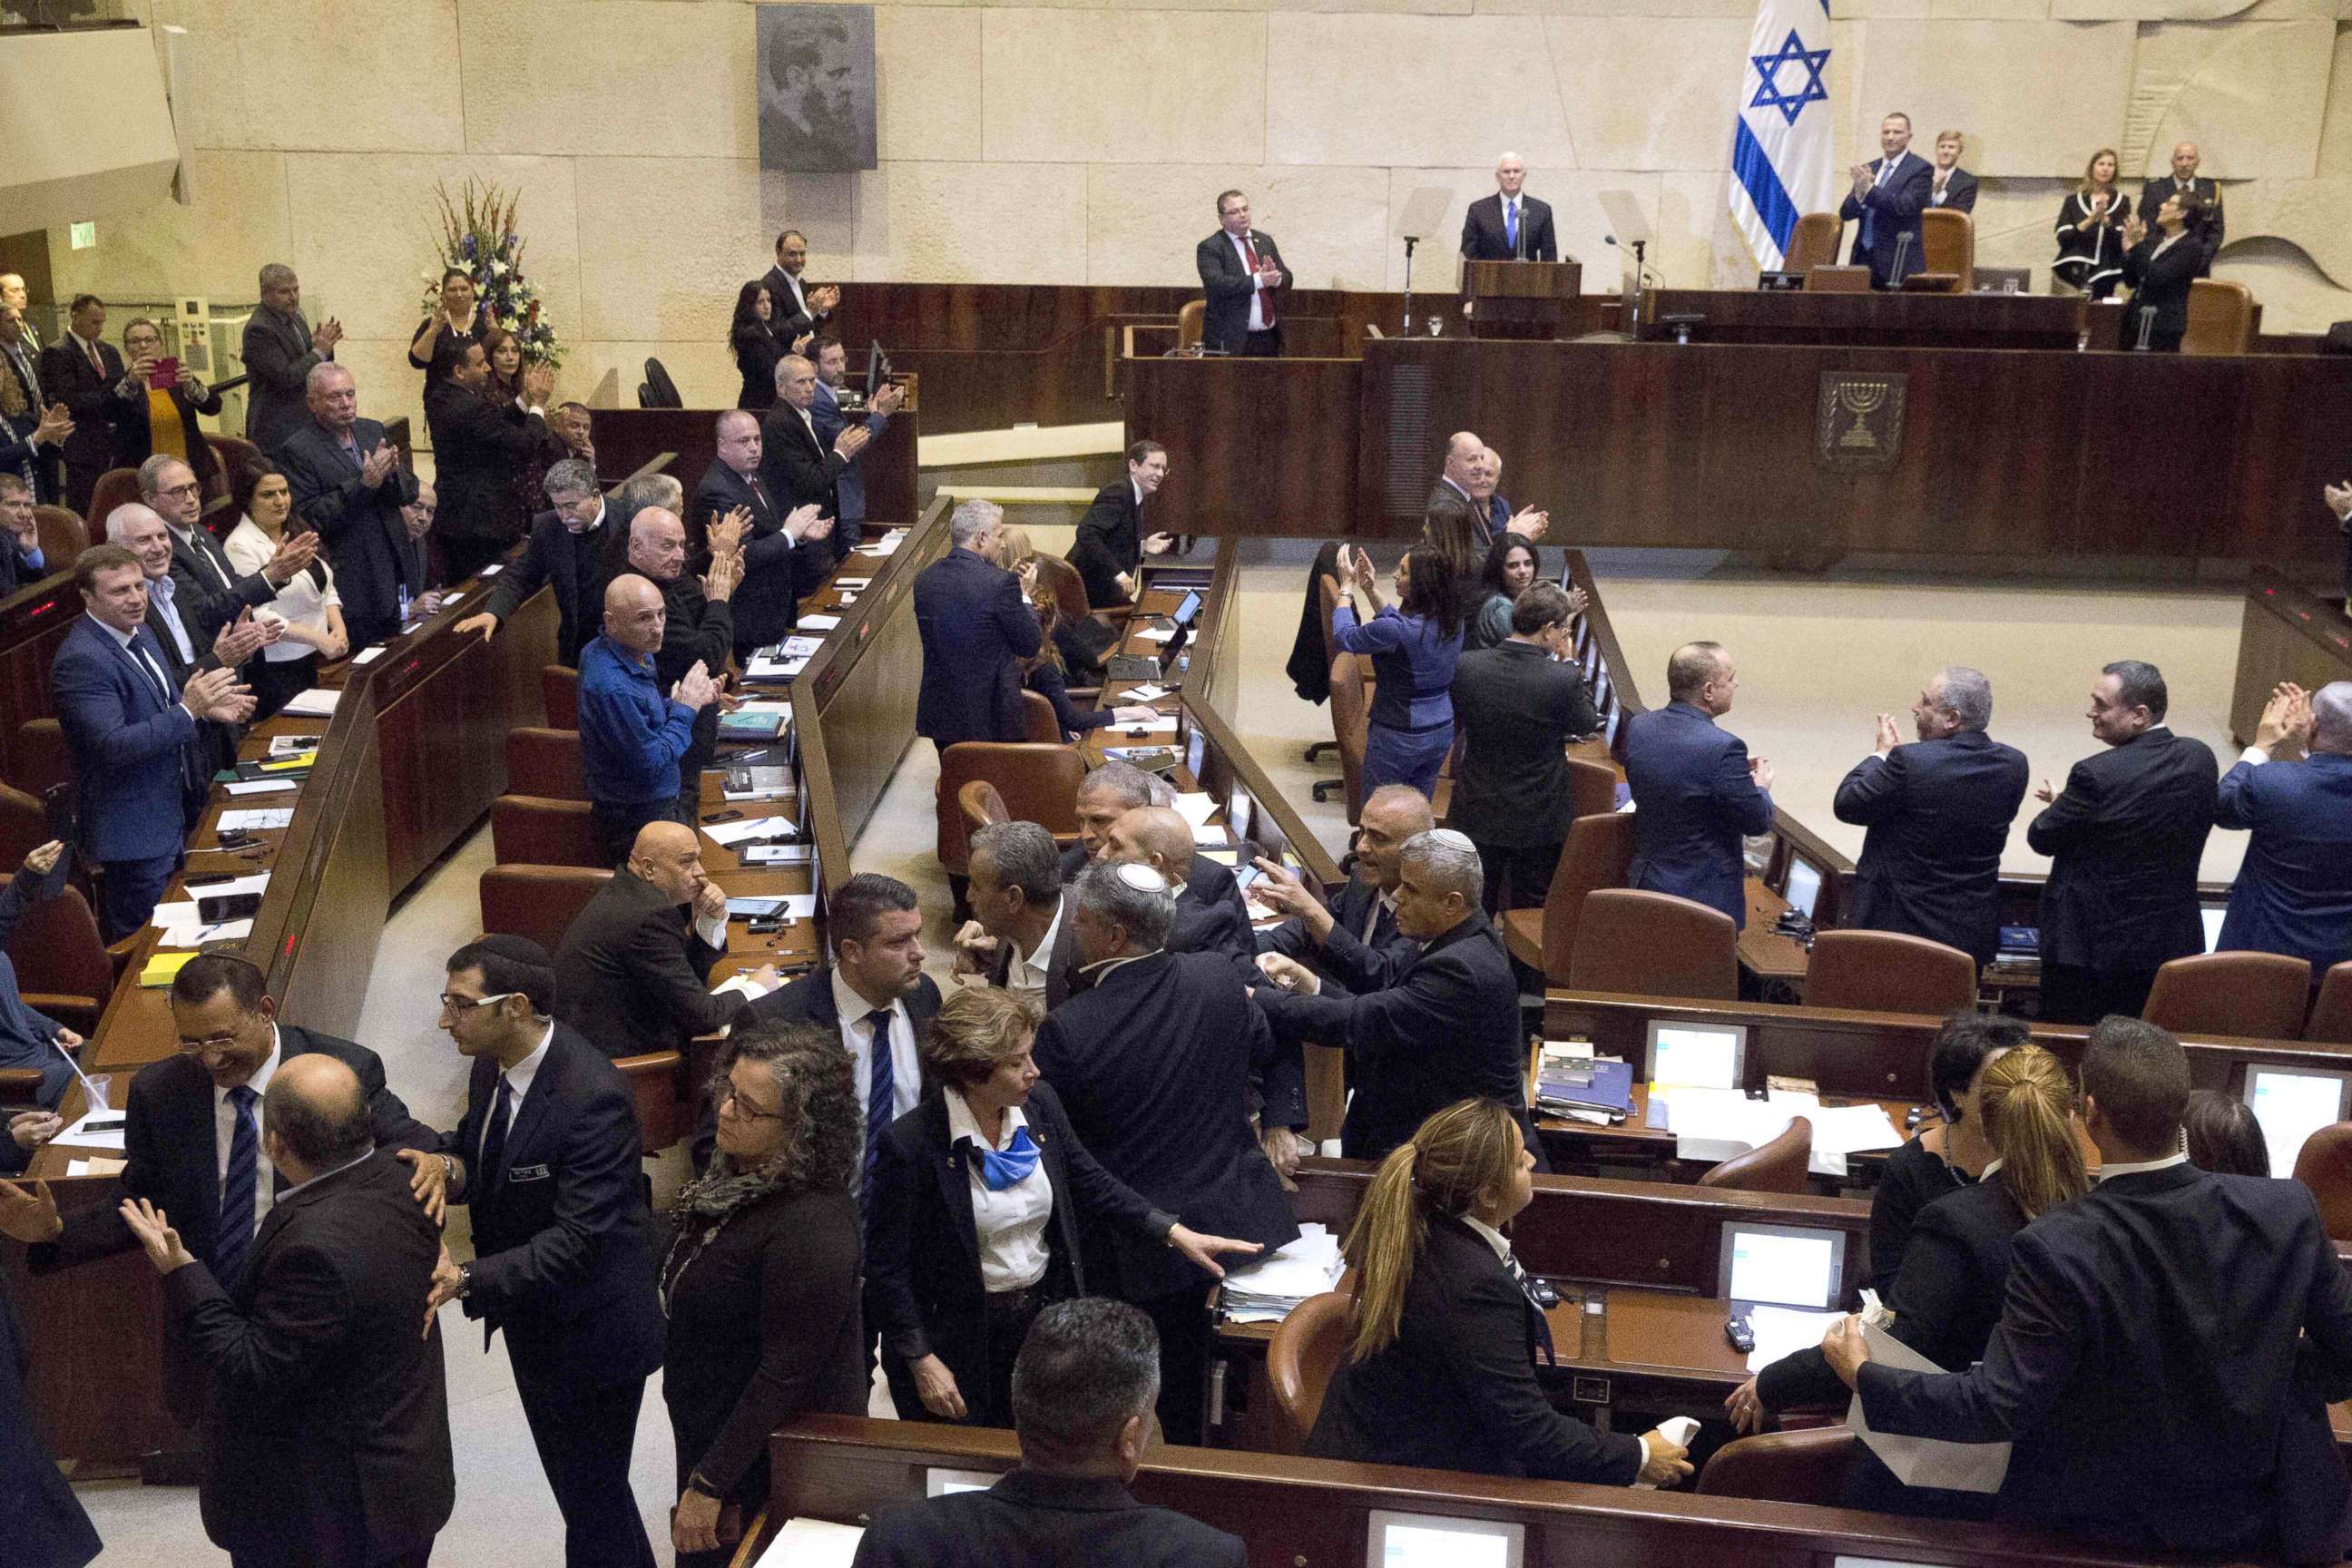 PHOTO: Israel's Arab parliamentary bloc and Knesset members scuffle with security after they held signs in protest during the speech of U.S. Vice President Mike Pence in Israel's parliament in Jerusalem, Jan. 22, 2018.